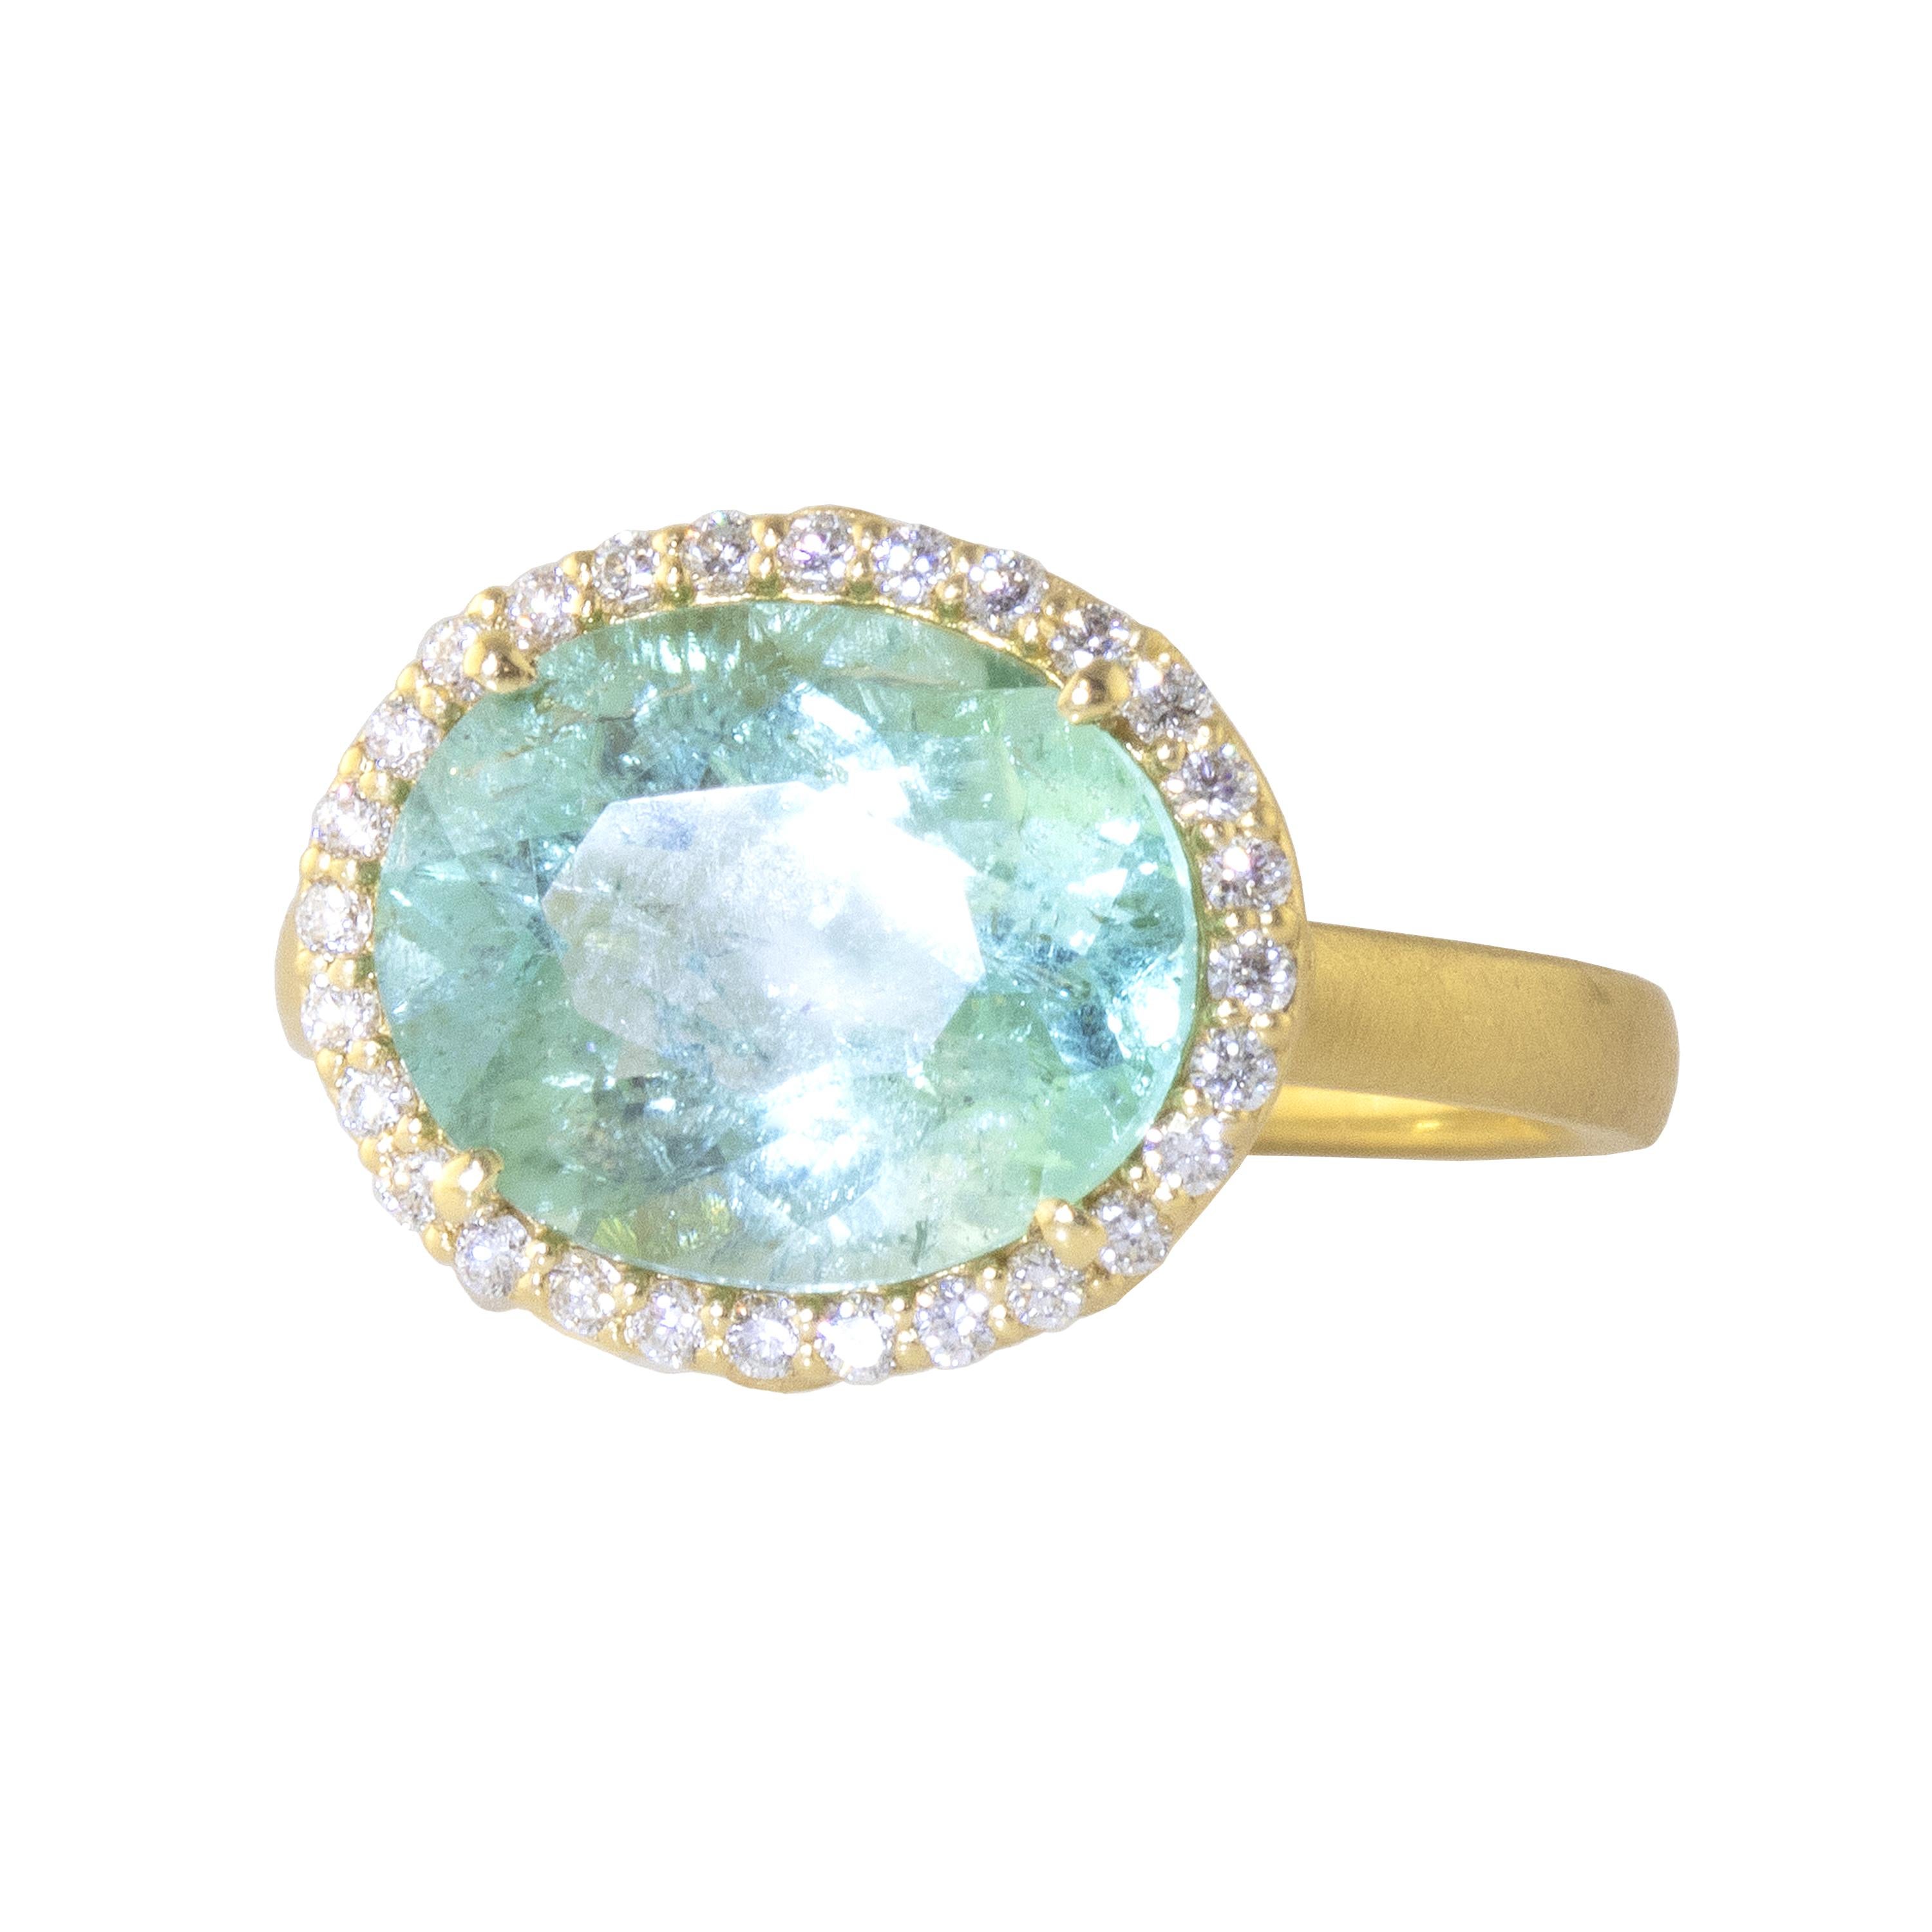 Dreaming ring featuring a 4.29 carat Mint Green, Paraiba colored tourmaline set in an 18k gold  wave bezel decorated with diamonds. The color of this tourmaline is a soft, mint color, similar to the color in Paraiba tourmalines.  Diamonds decorate